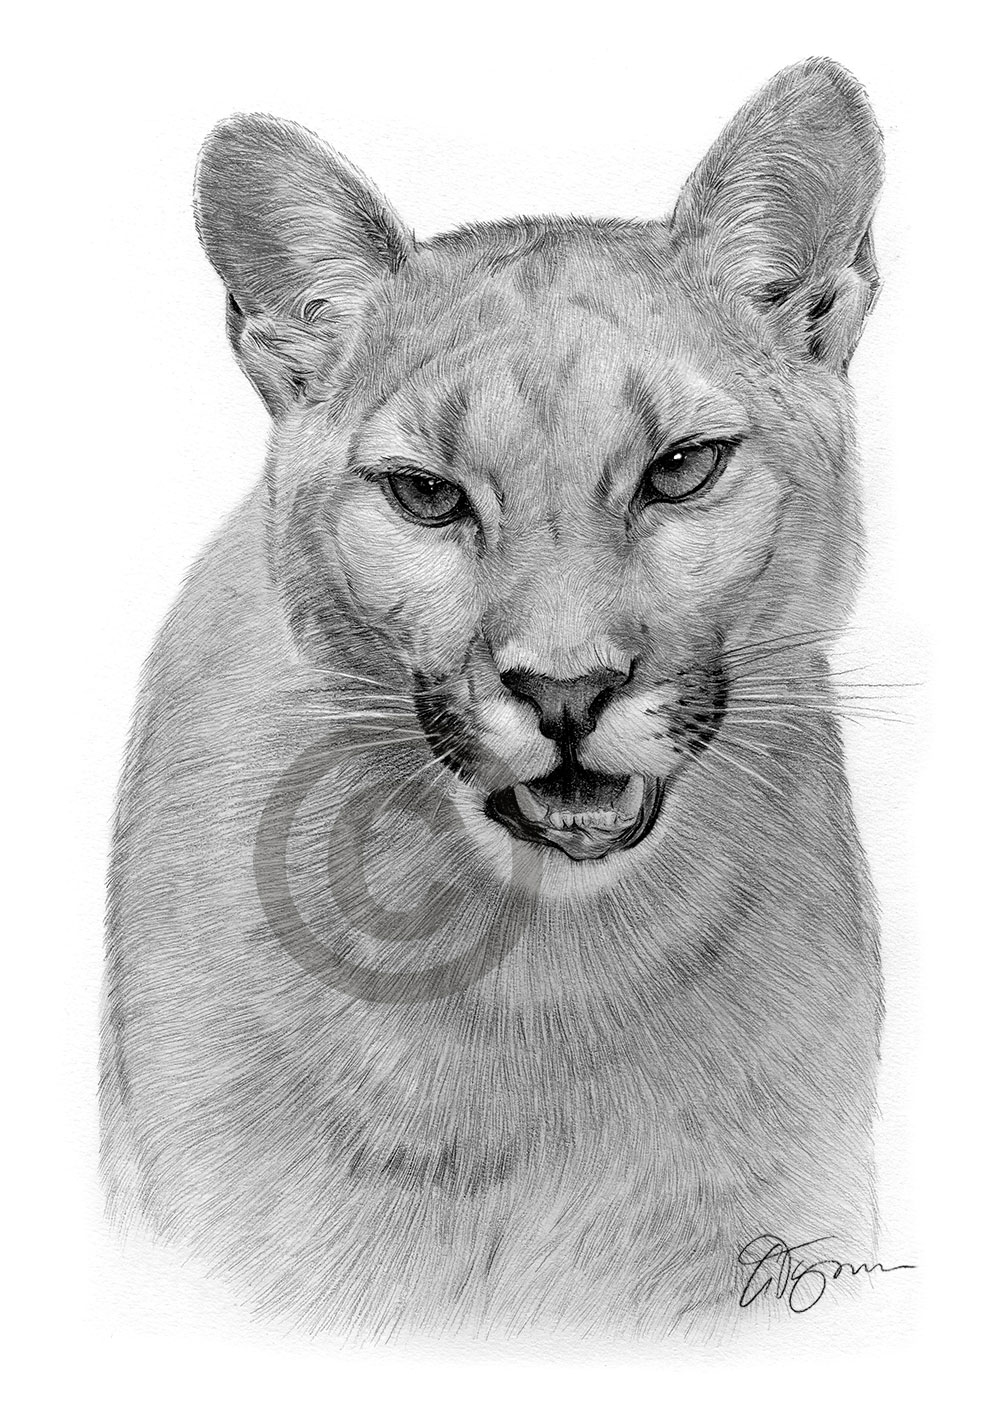 Pencil drawing of an adult cougar by artist Gary Tymon